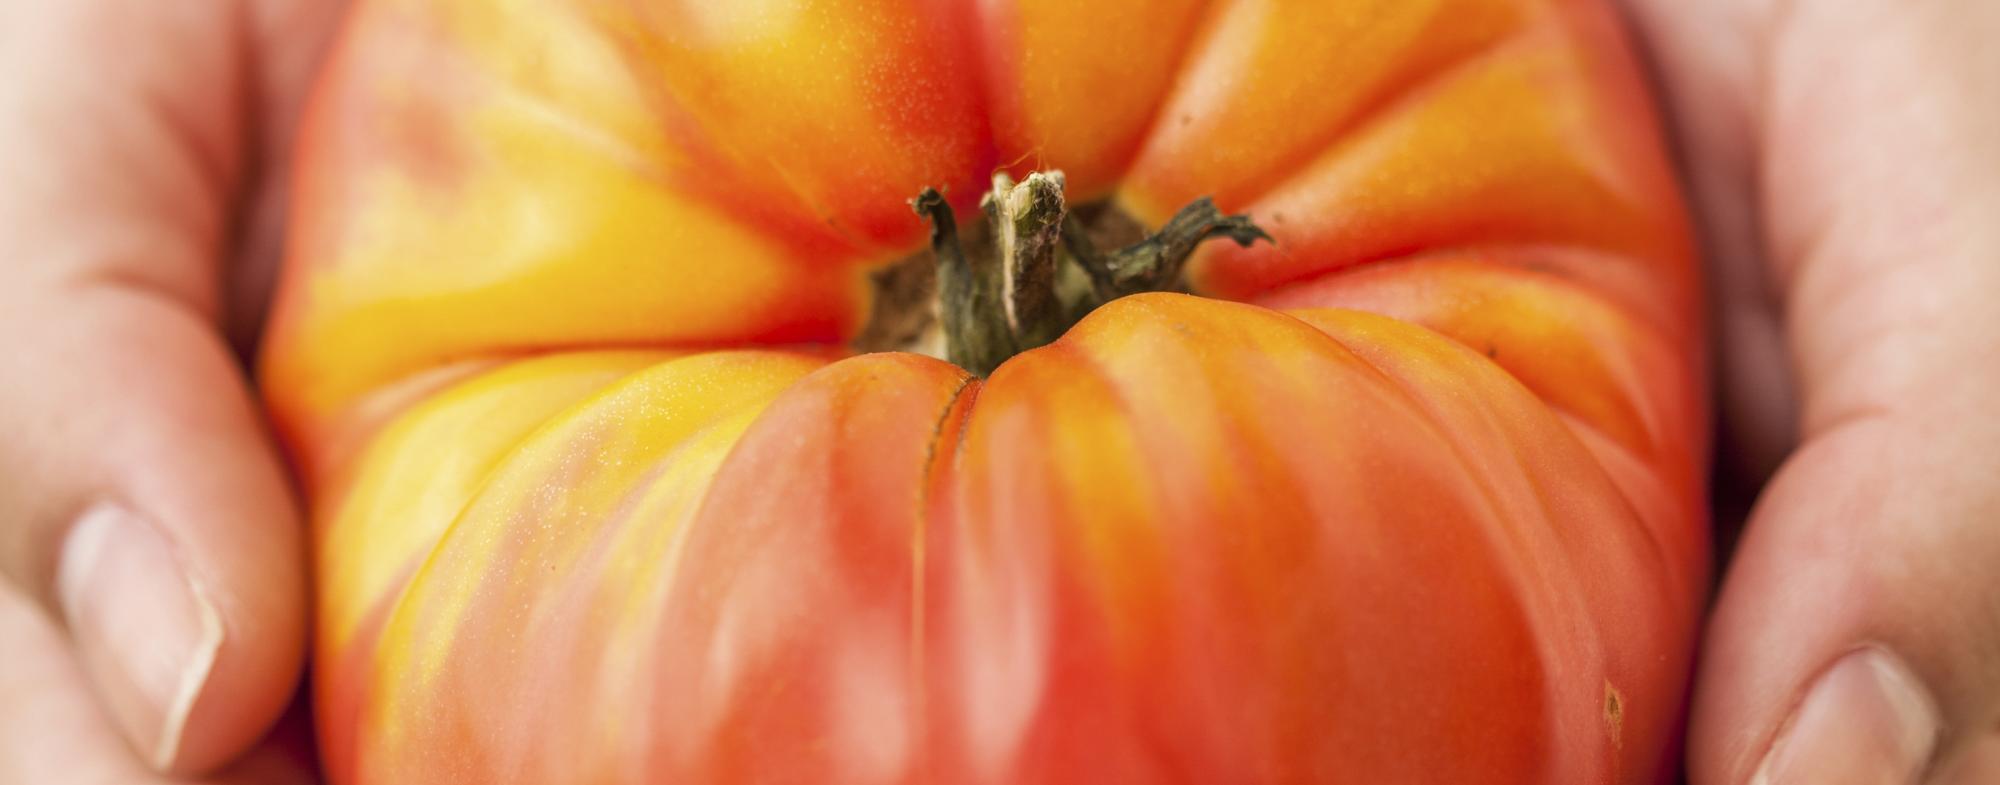 A close-up of an orange-red heirloom tomato held in two hands.